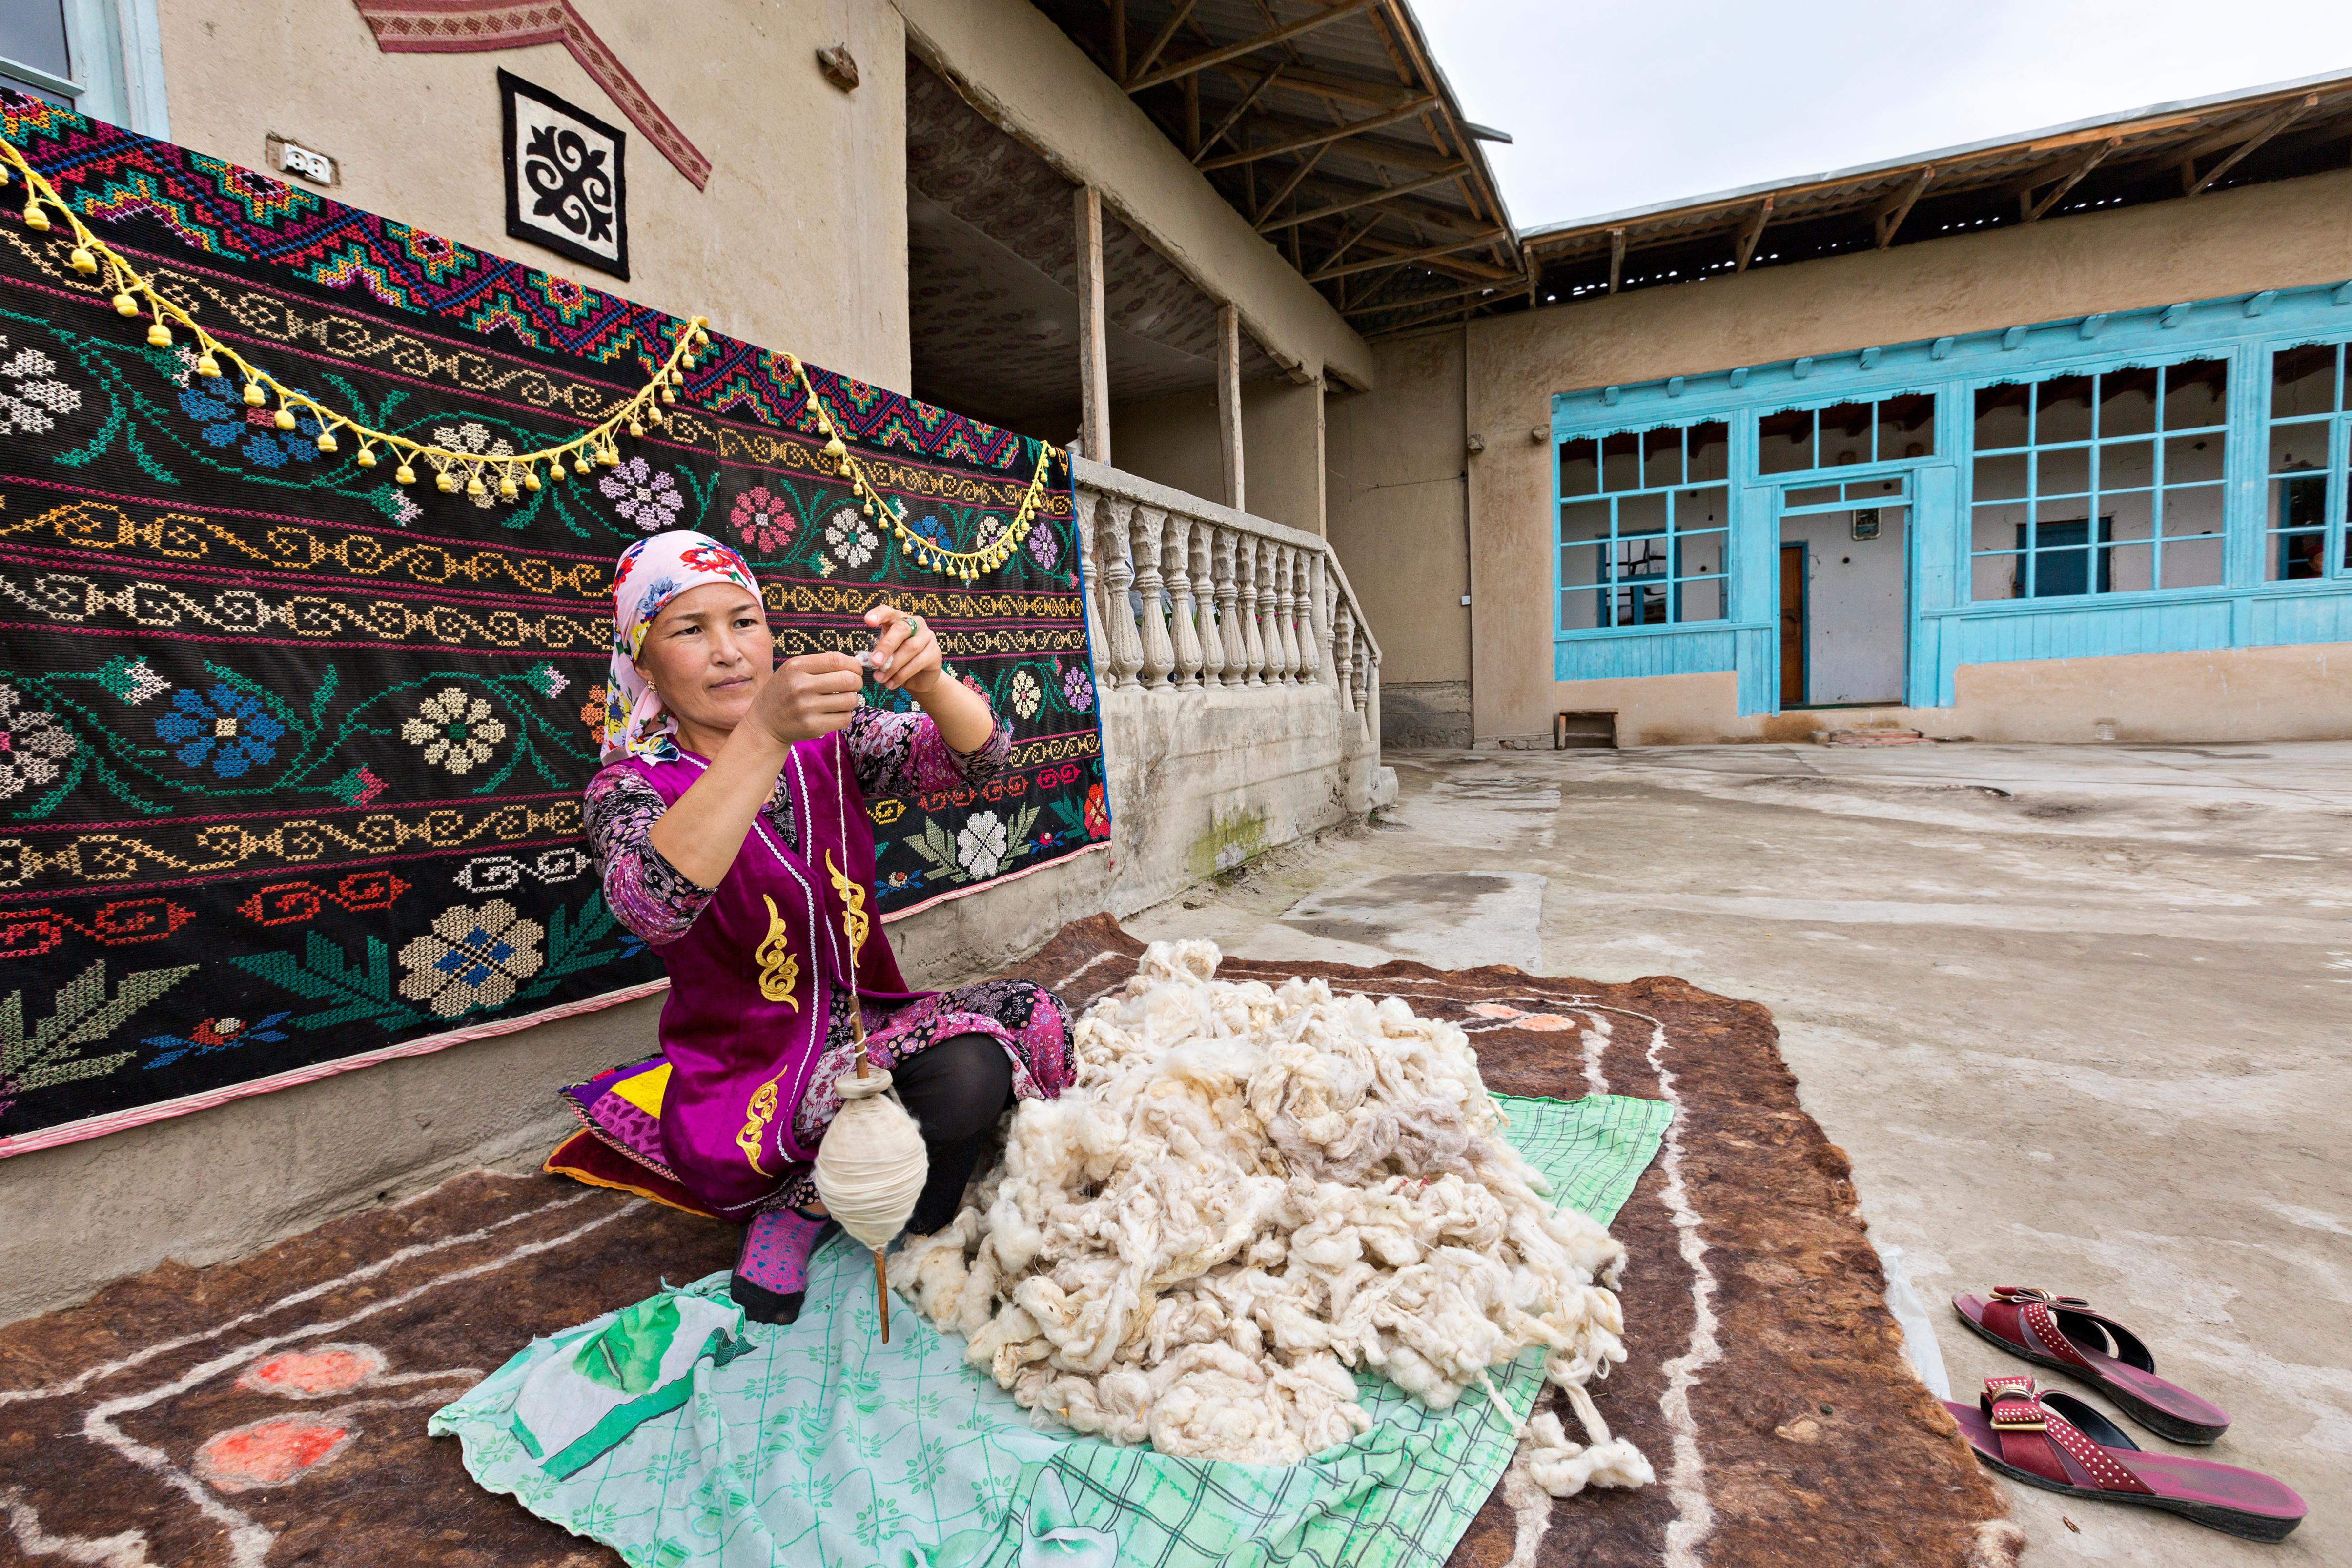 Catch up with locals and learn about handicrafts at Rishtan Village - Photo credits: MehmetO / Shutterstock.com